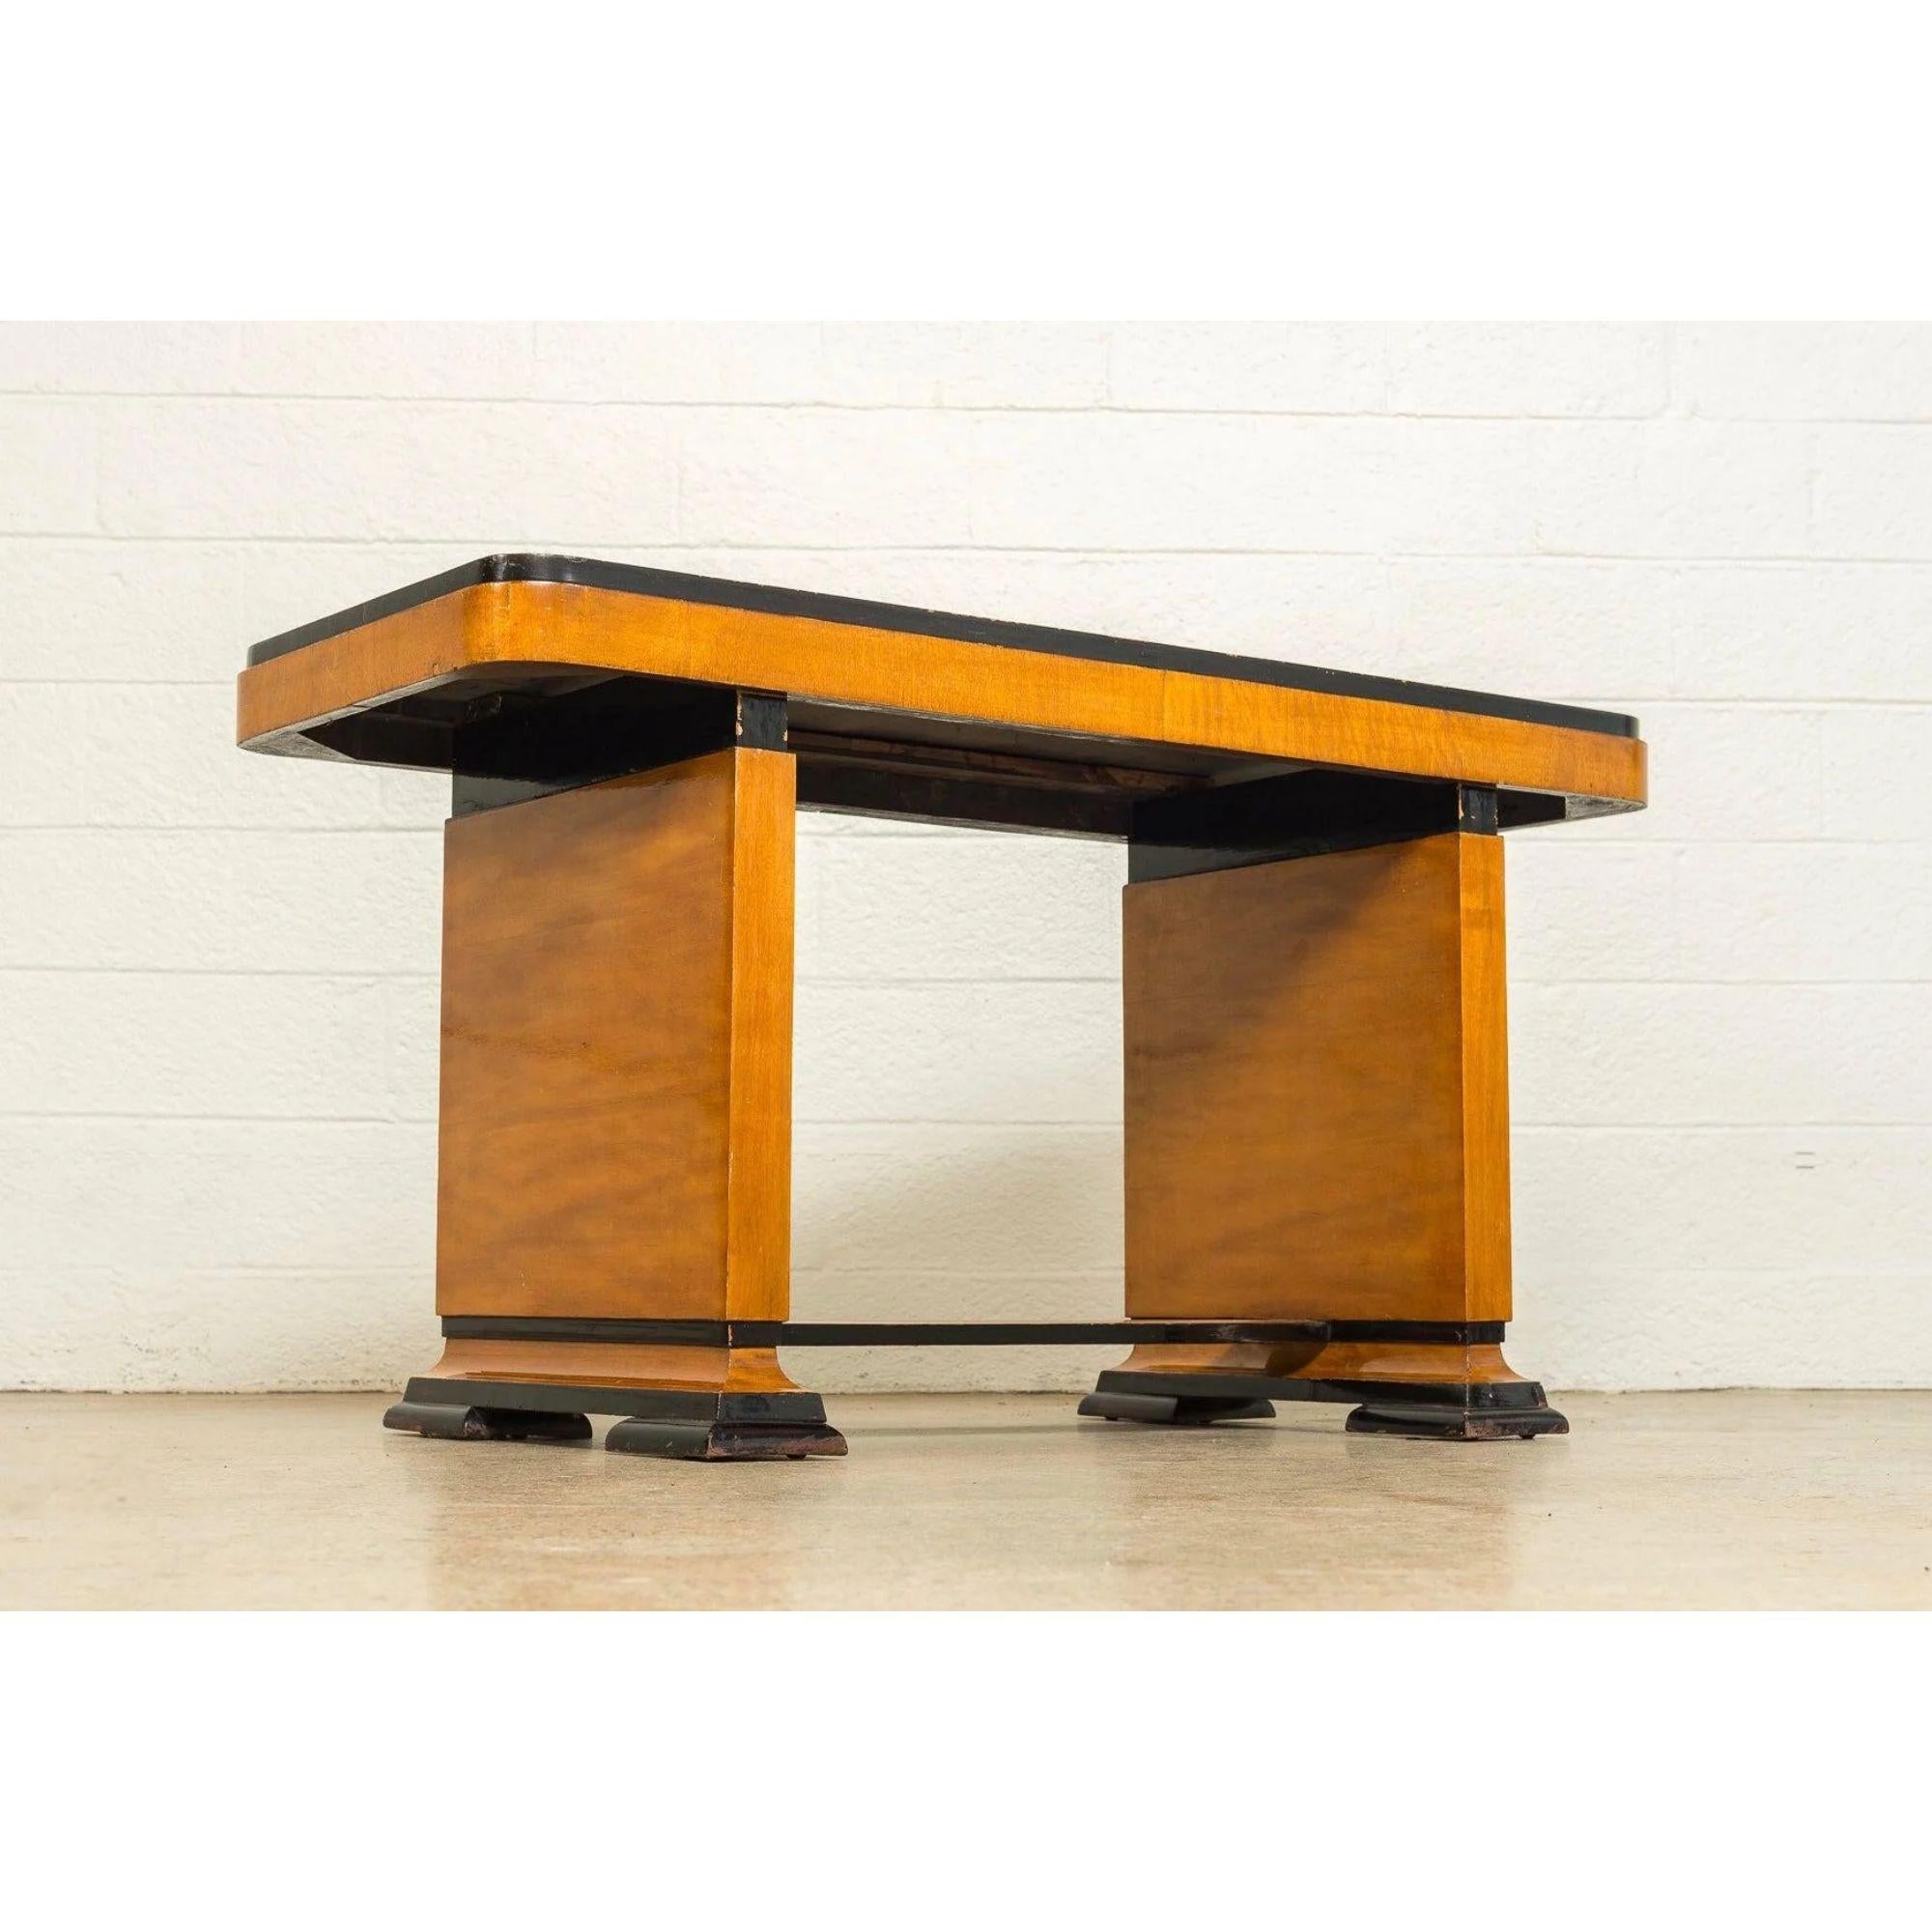 20th Century Art Deco Table or Writing Desk in Maple Wood with Ebonized Accents, circa 1930 For Sale